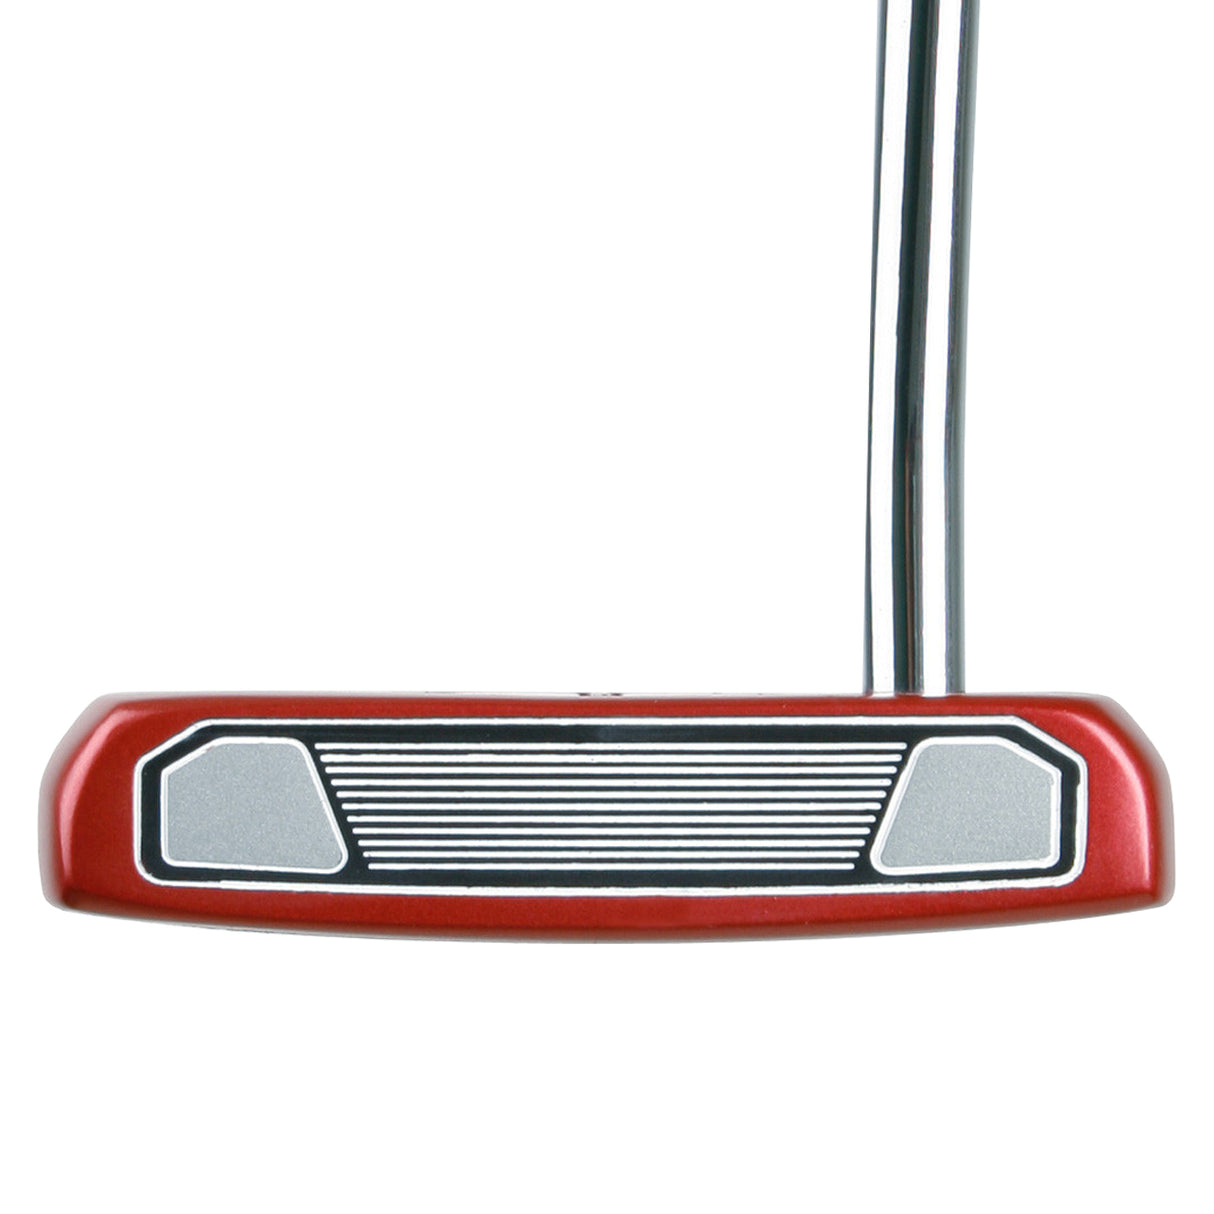 Orlimar Golf F60 2-Ball Style Mallet Putter (Red)